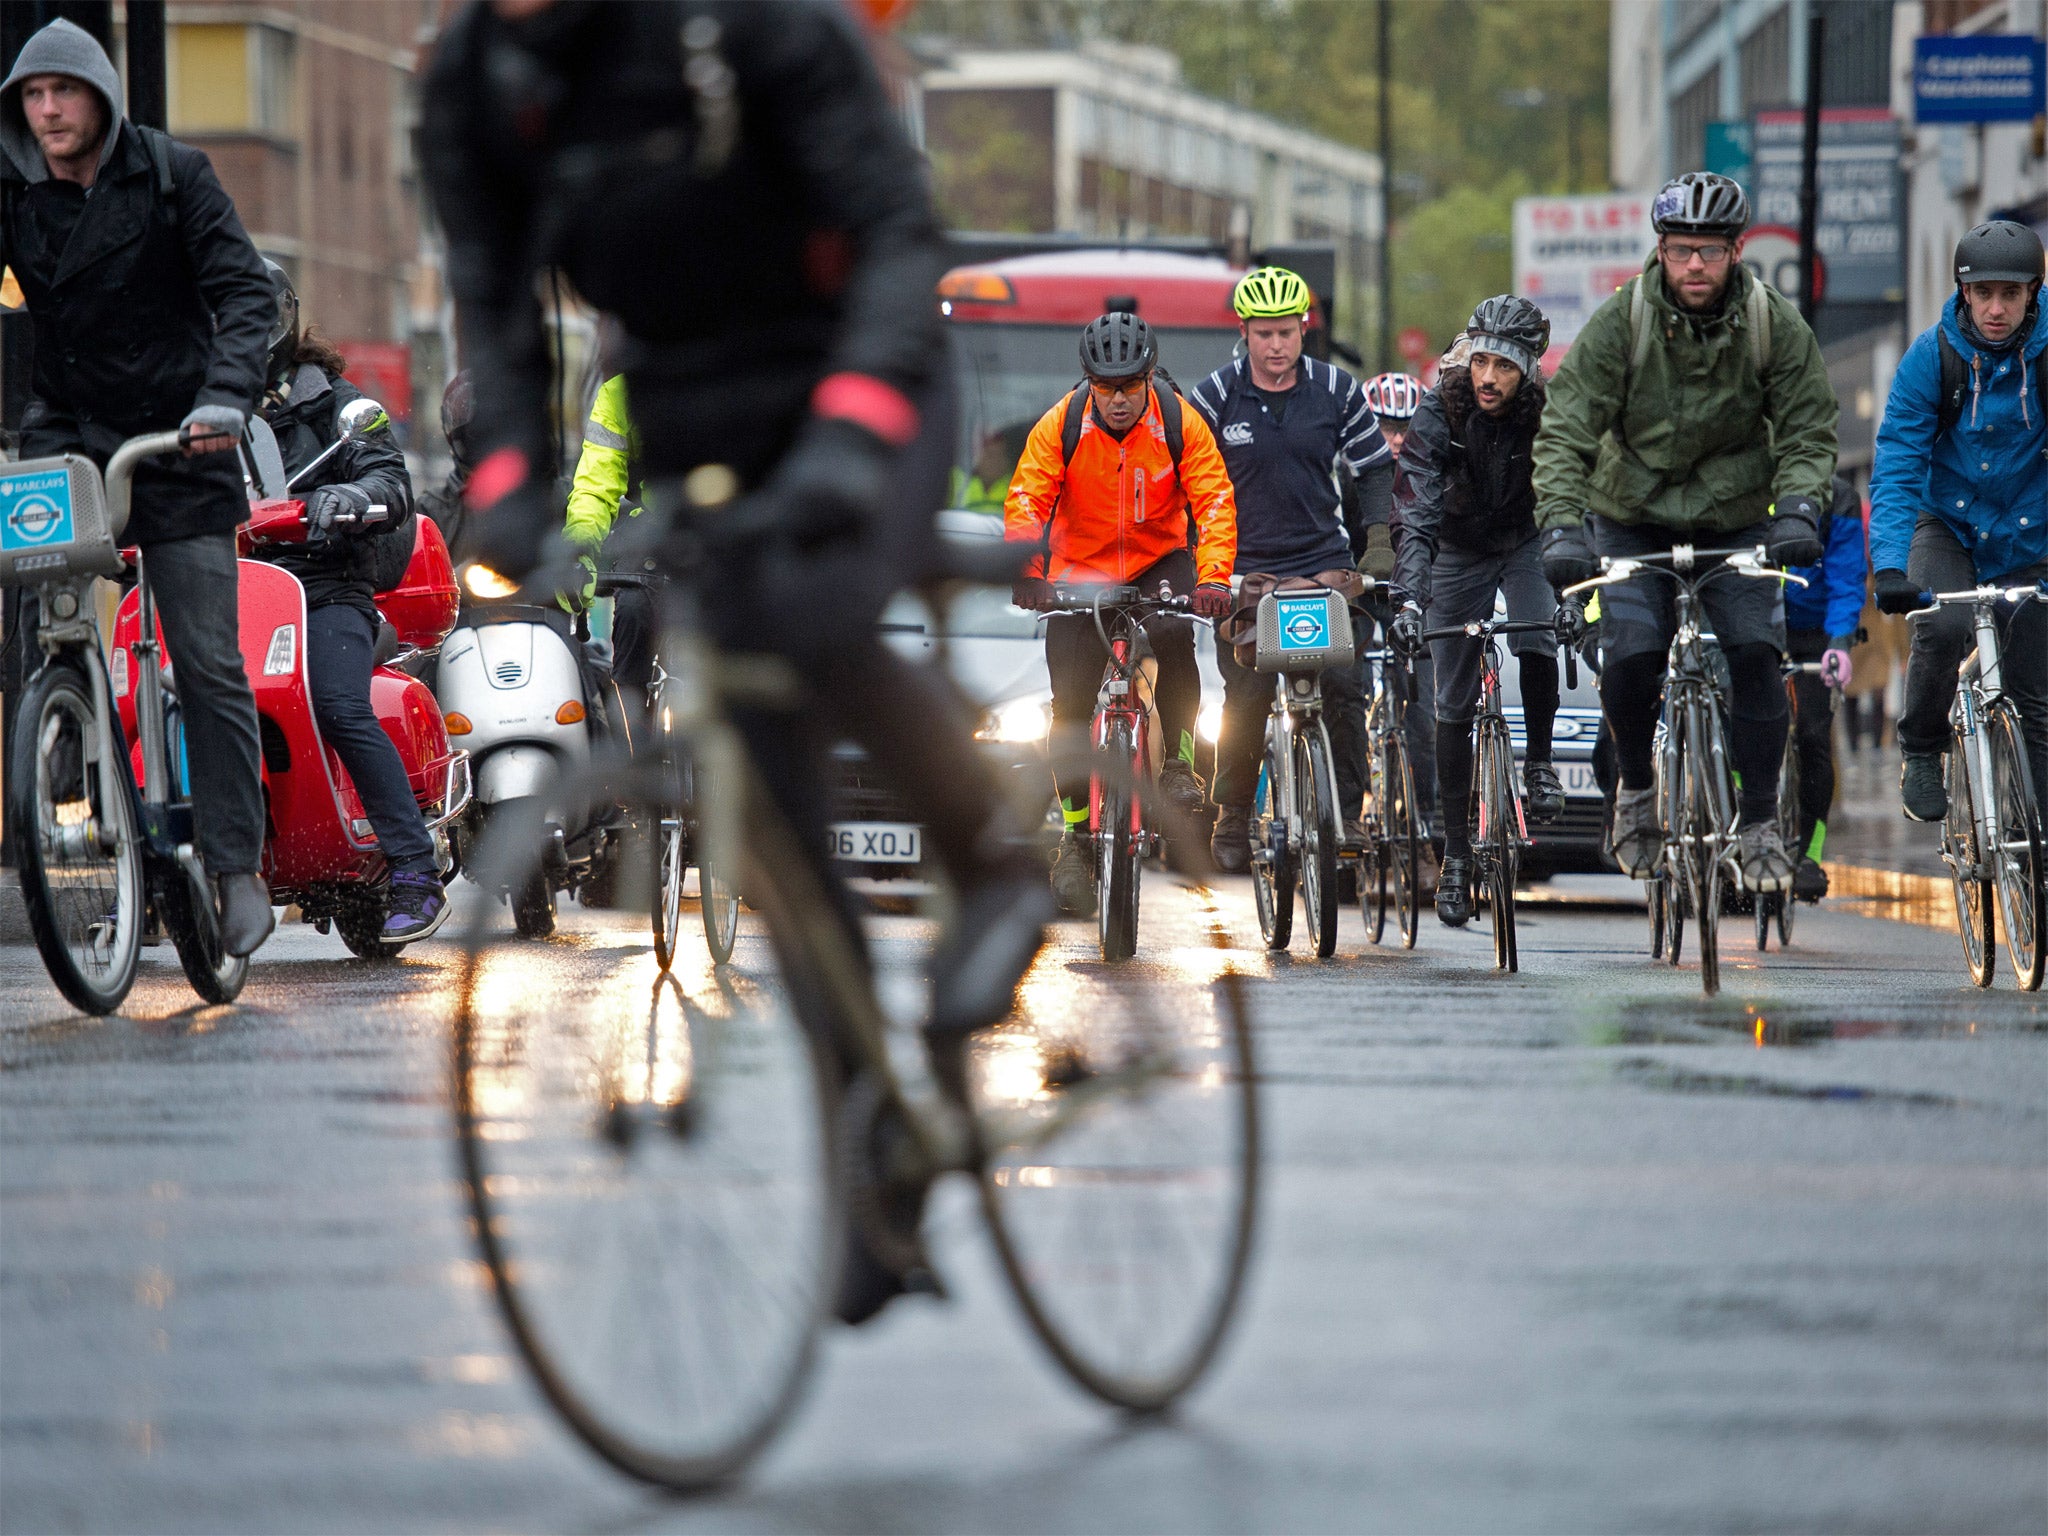 Cyclists ride in front of traffic in central London